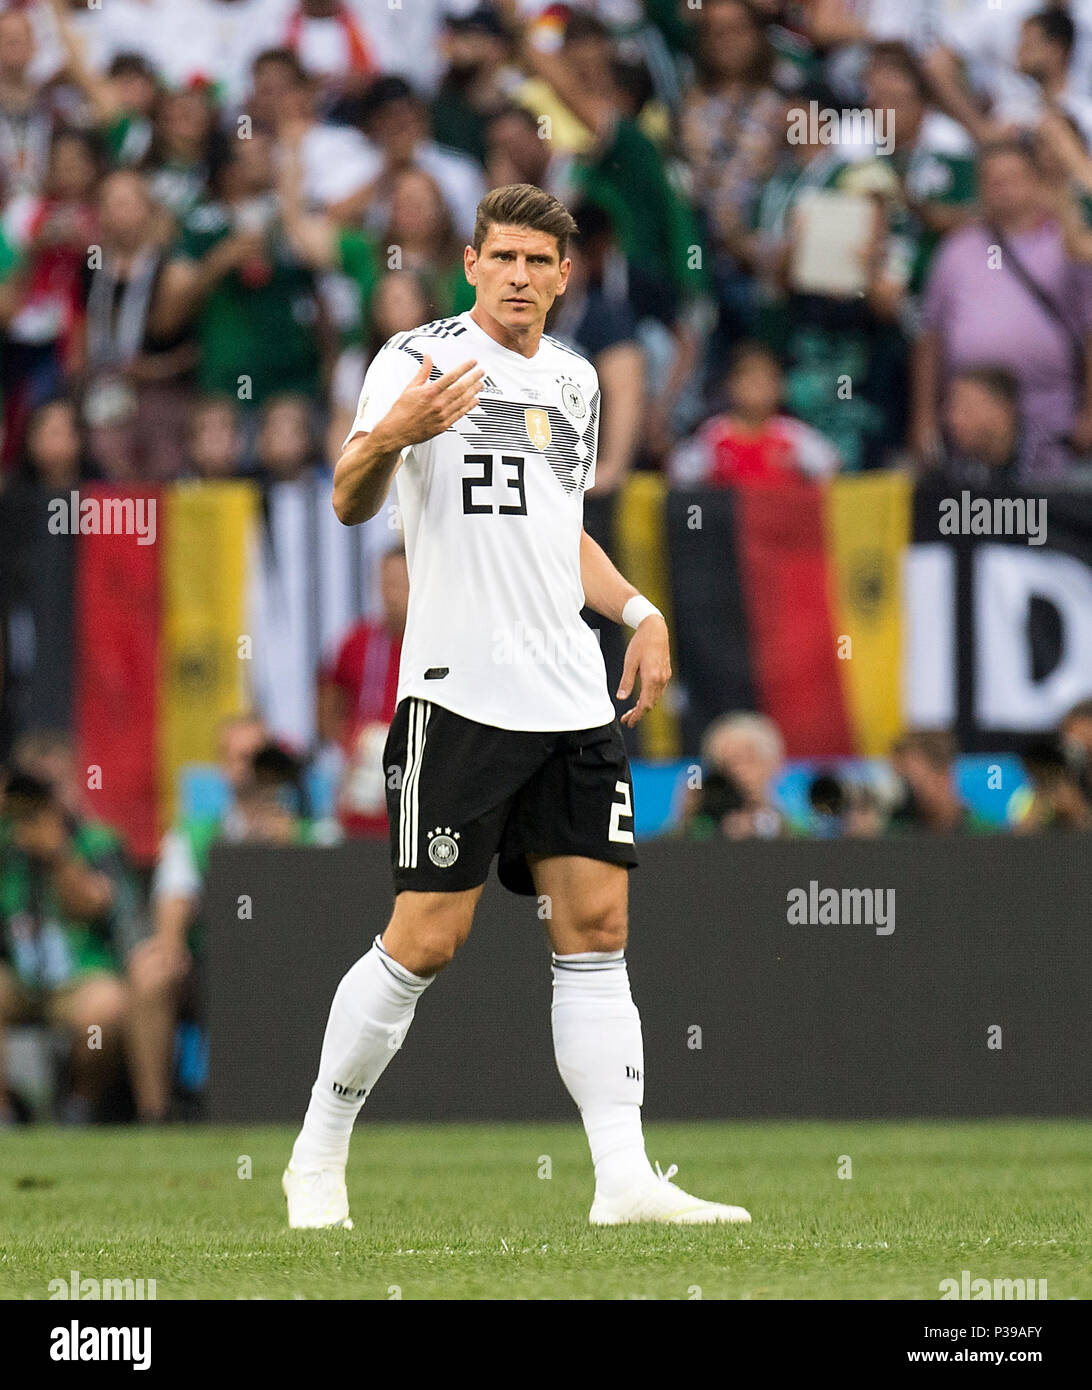 Mario GOMEZ (GER) - Germany (GER) - Mexico (MEX), Preliminary Group F, Game 11, on 17.06.2018 in Moscow, Football World Cup 2018 in Russia from 14.06. - 15.07.2018. | usage worldwide Stock Photo